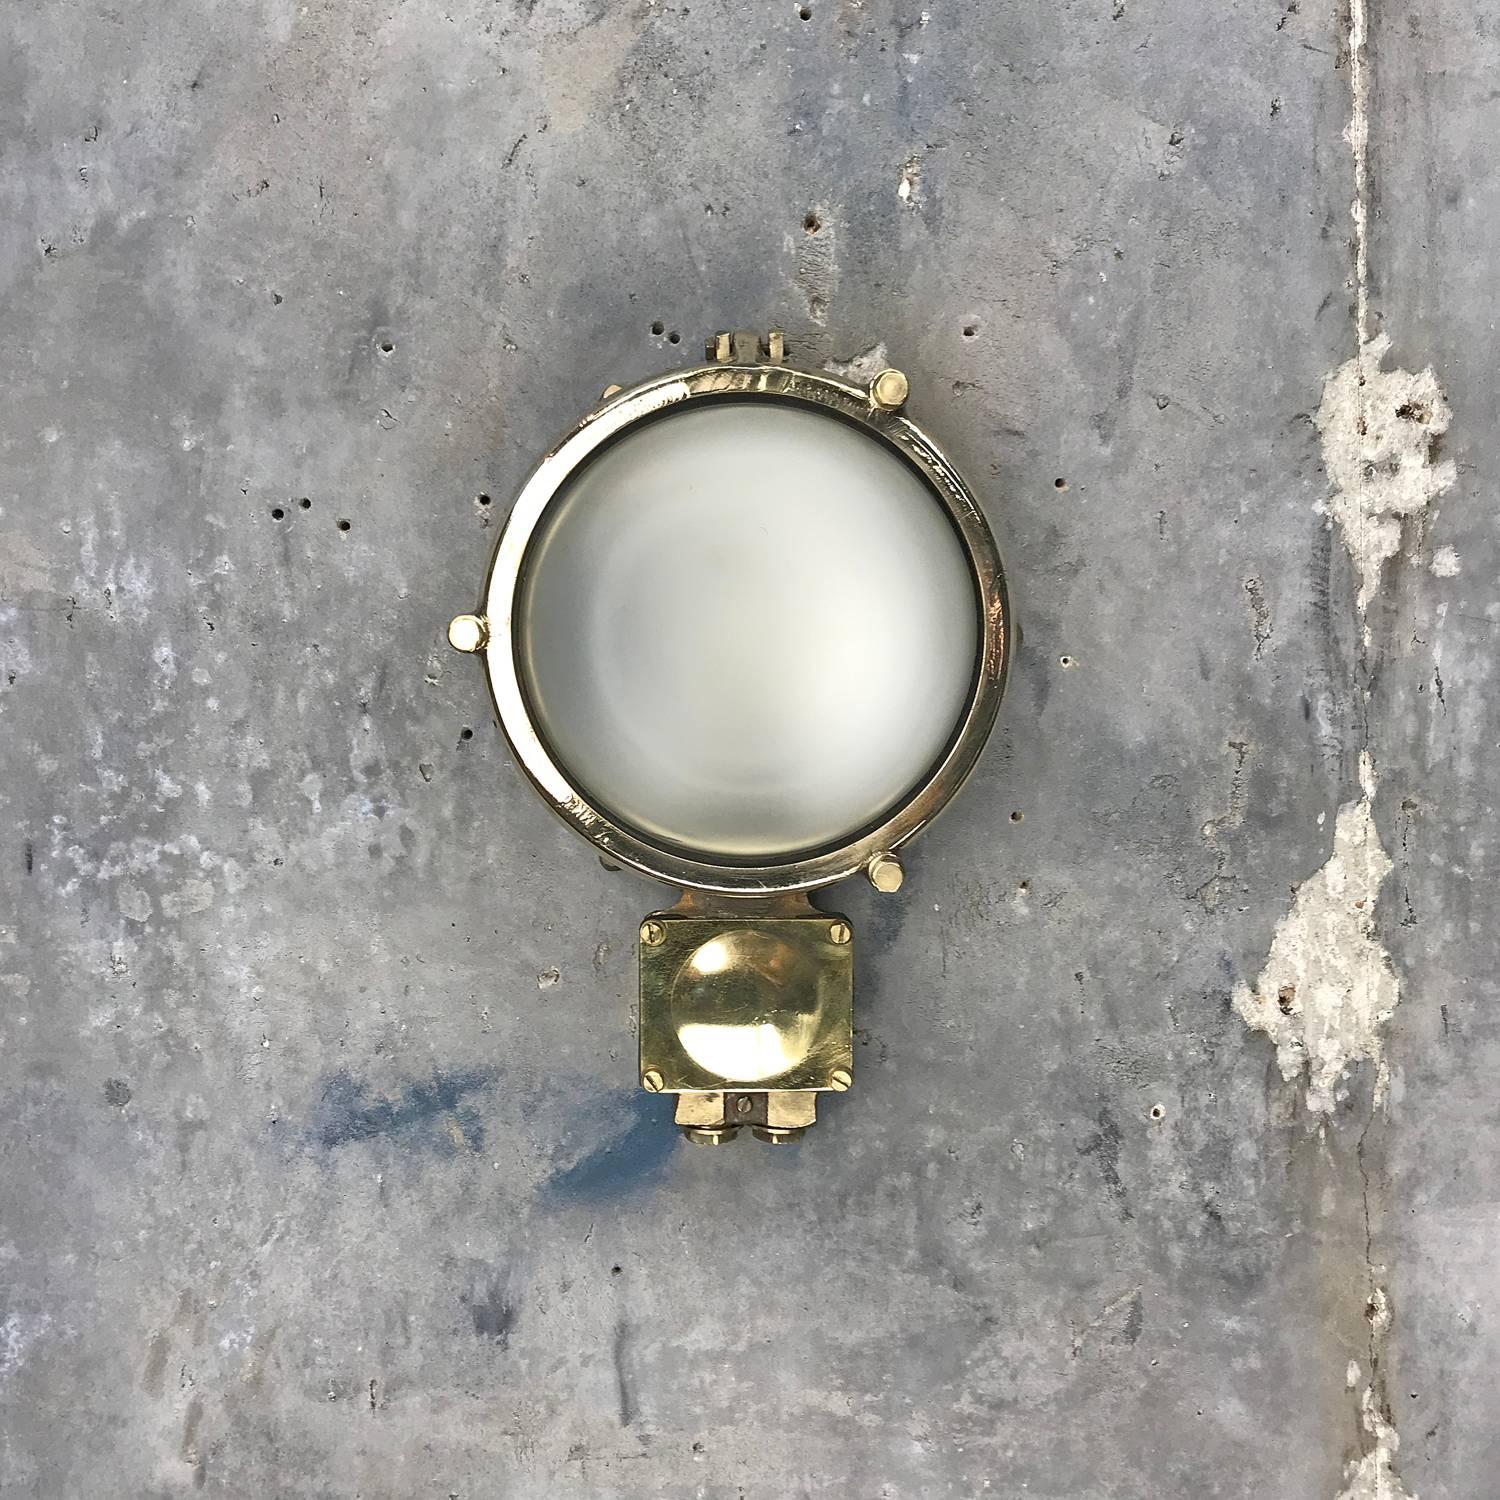 1970s German Industrial Cast Brass Circular Wall Light, Frosted Glass Shade 6